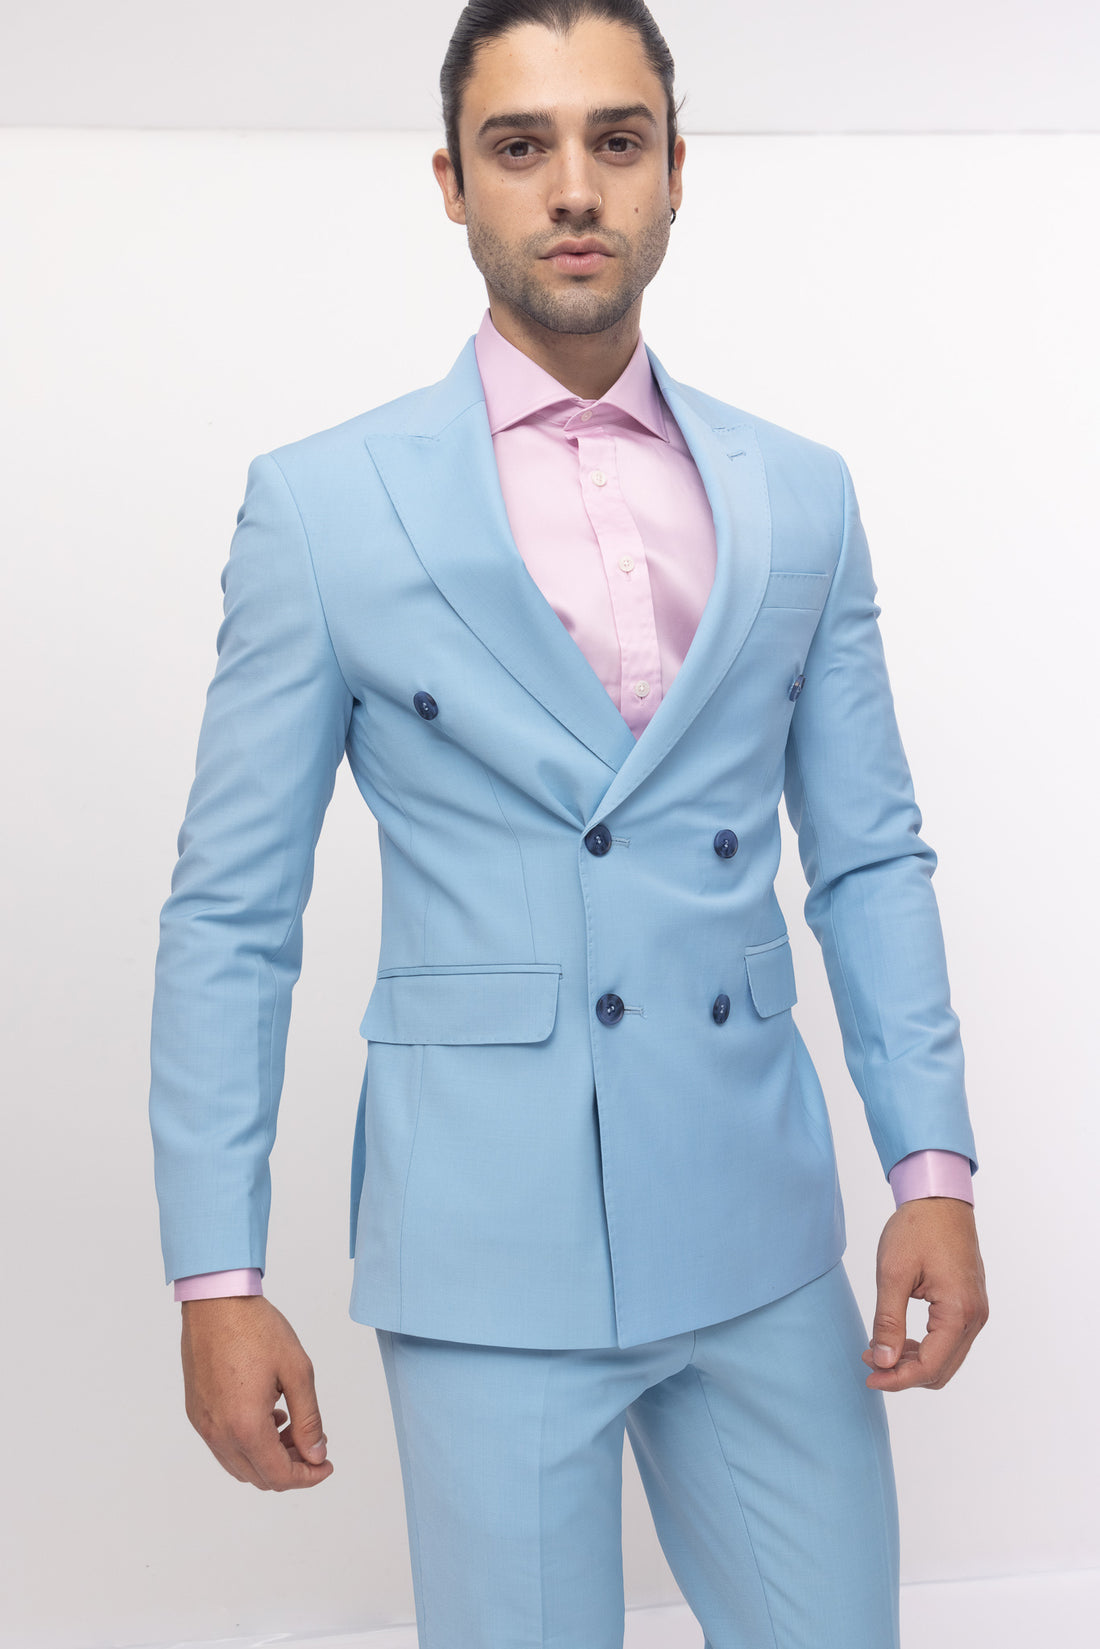 R206 - Double Breasted Suit - Sky Blue - Ron Tomson